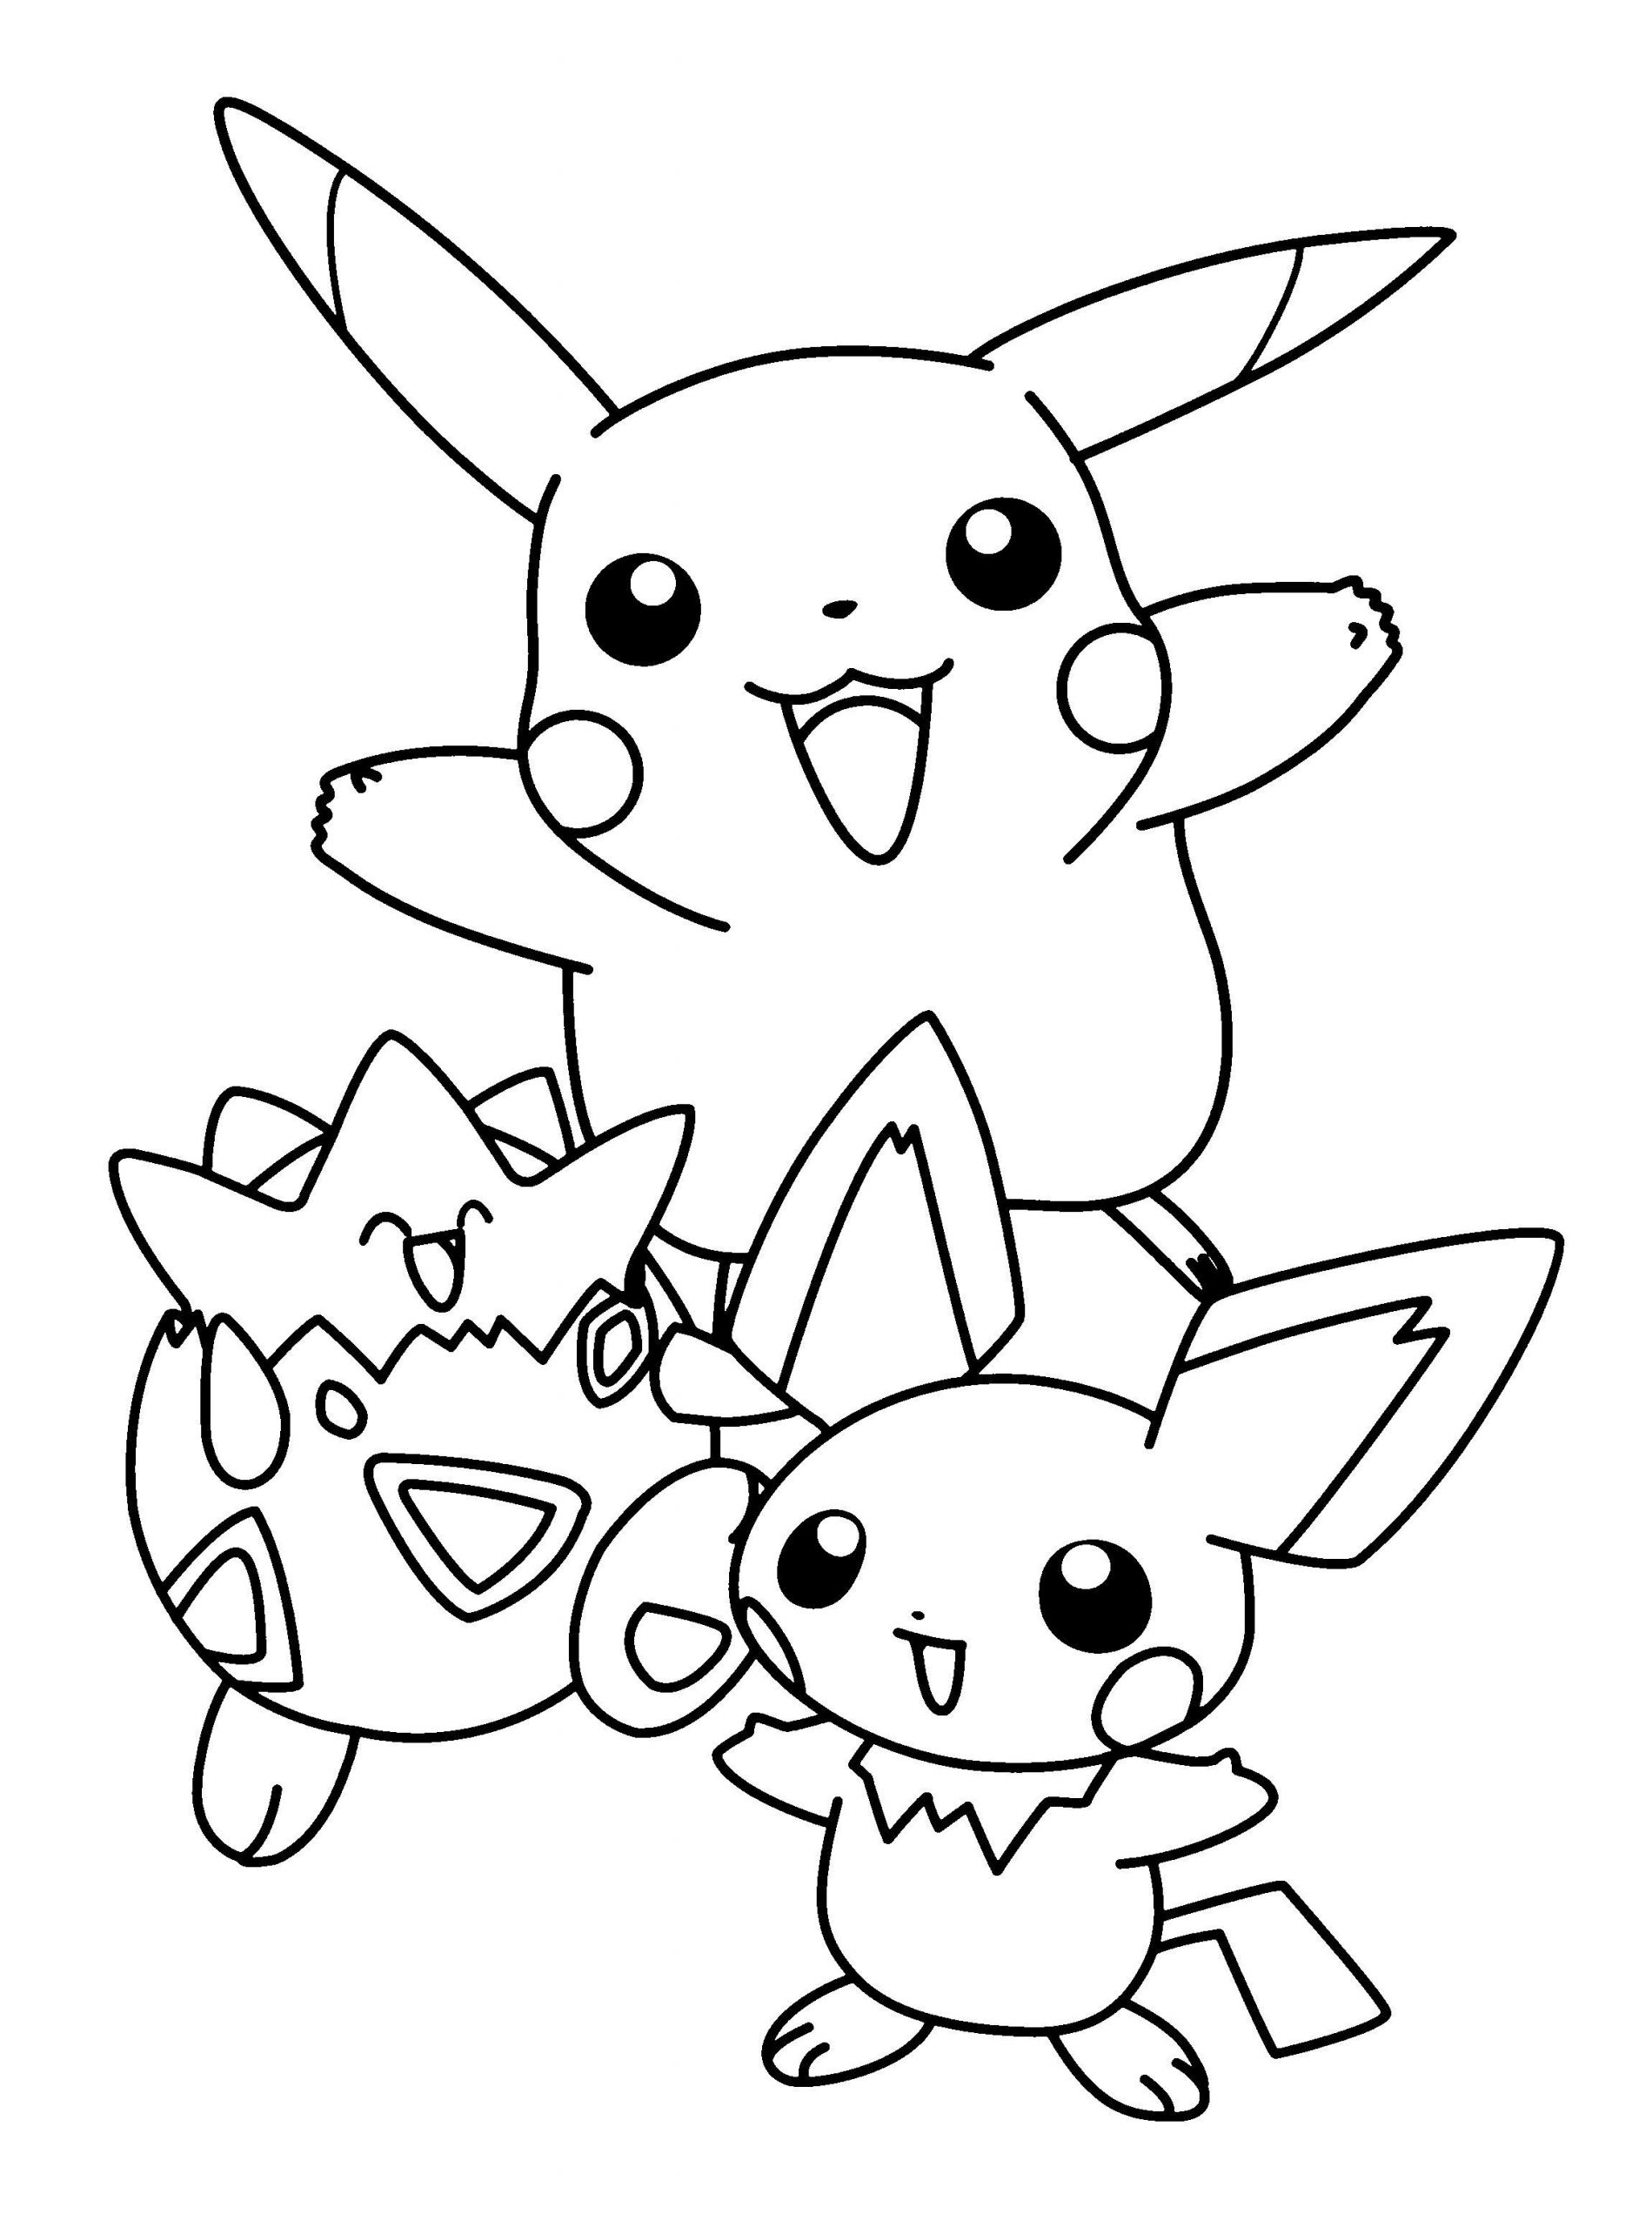 Pokemon Coloring Pages For Boys
 Pokemon Coloring Pages Free Download procoloring